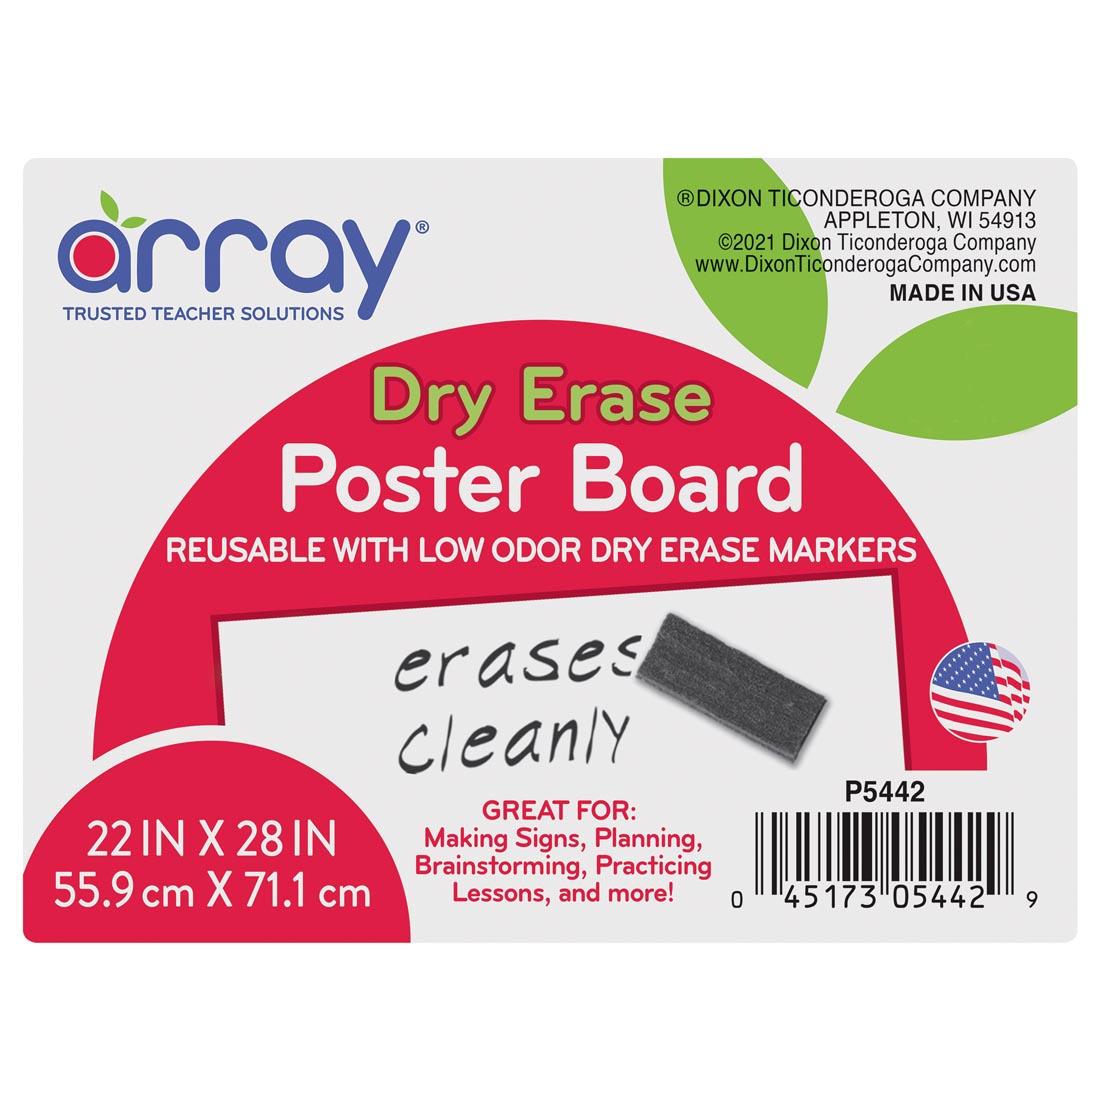 Array Dry Erase Poster Board